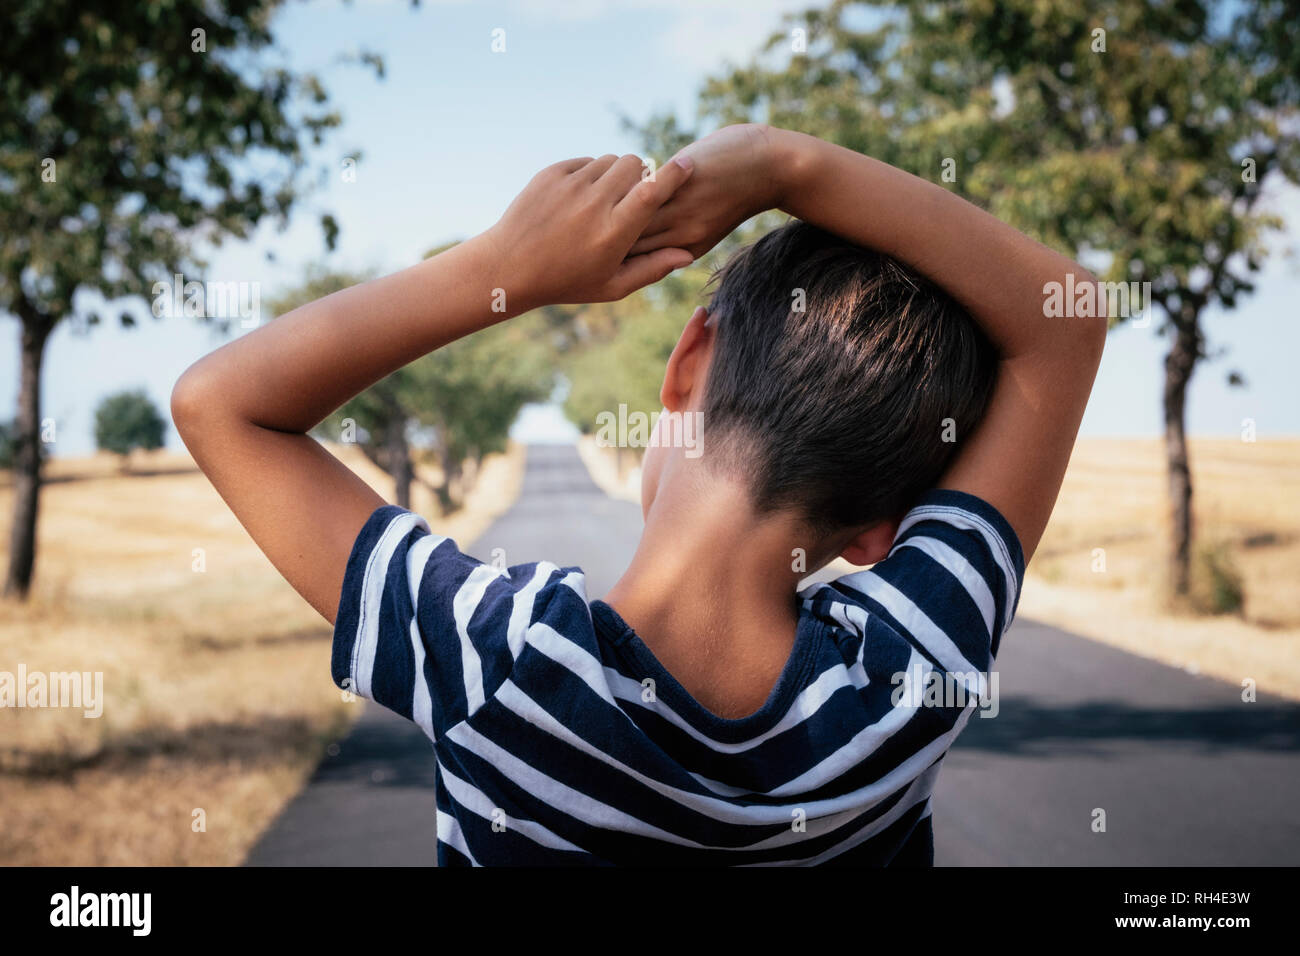 Boy standing on rural road Stock Photo